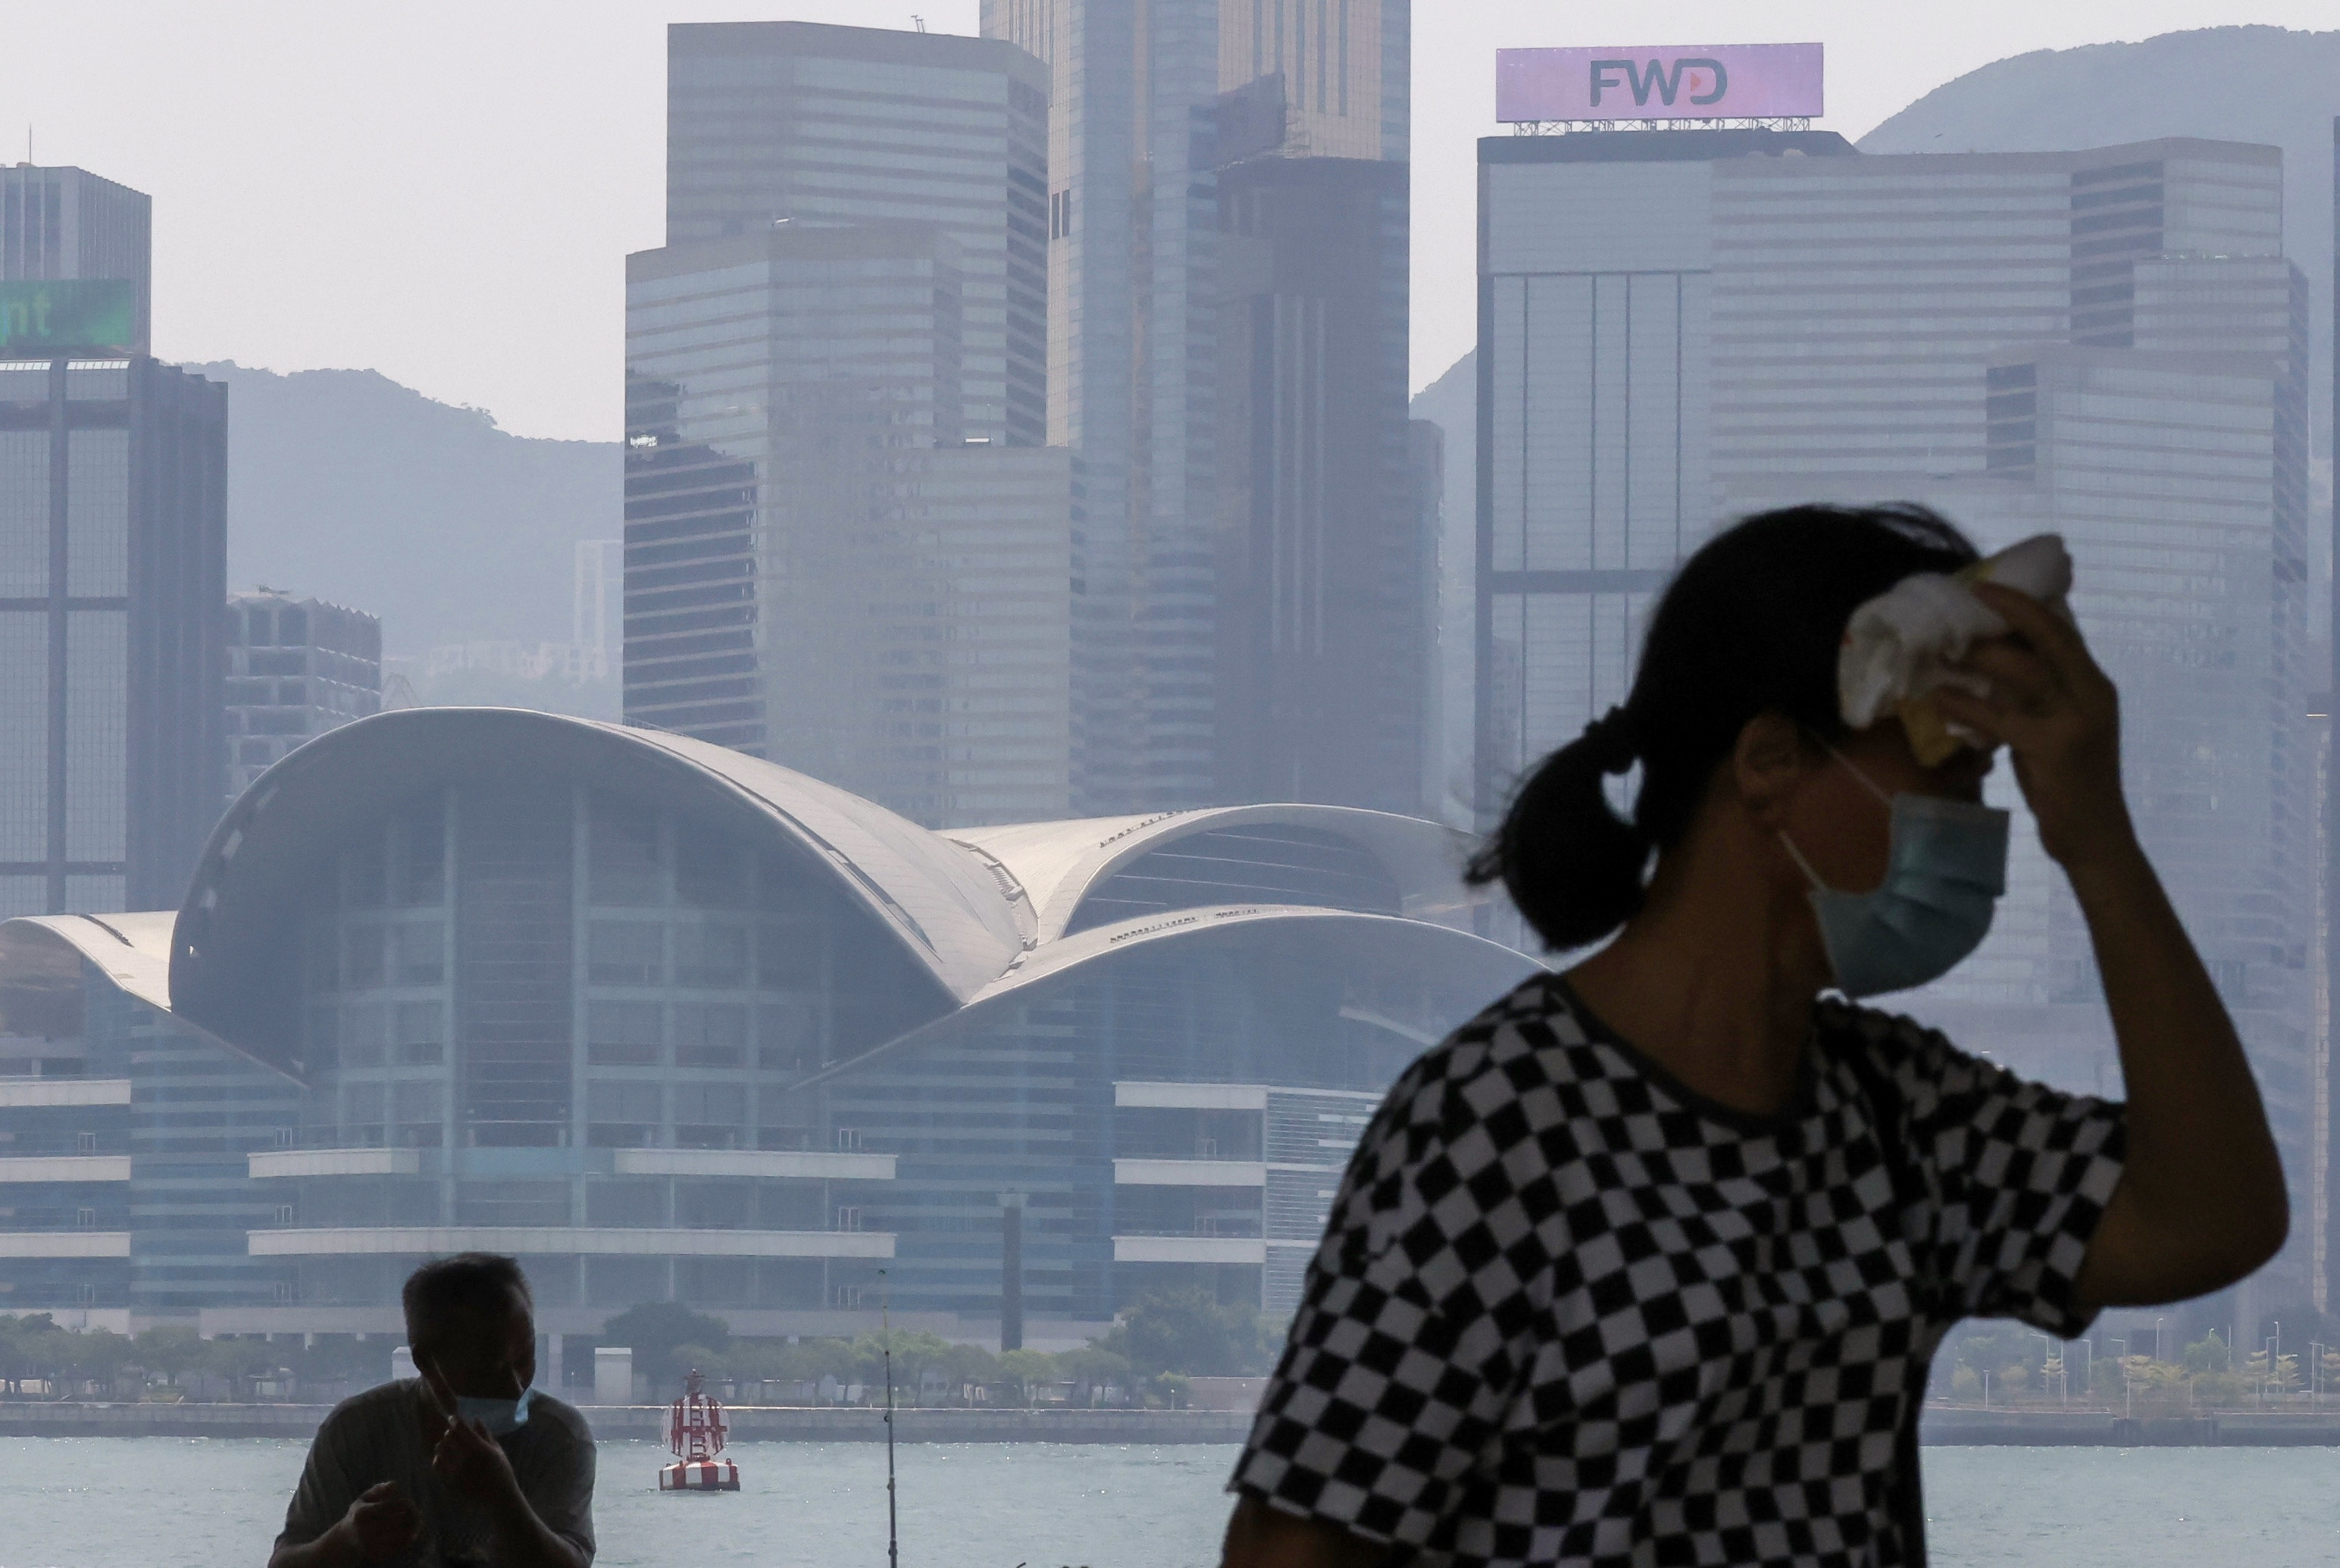 HIgh temperatures and a haze at the Tsim Sha Tsui Promenade as the Environmental Protection Department issues an air pollution warning for much of the city. Photo: Jonathan Wong.